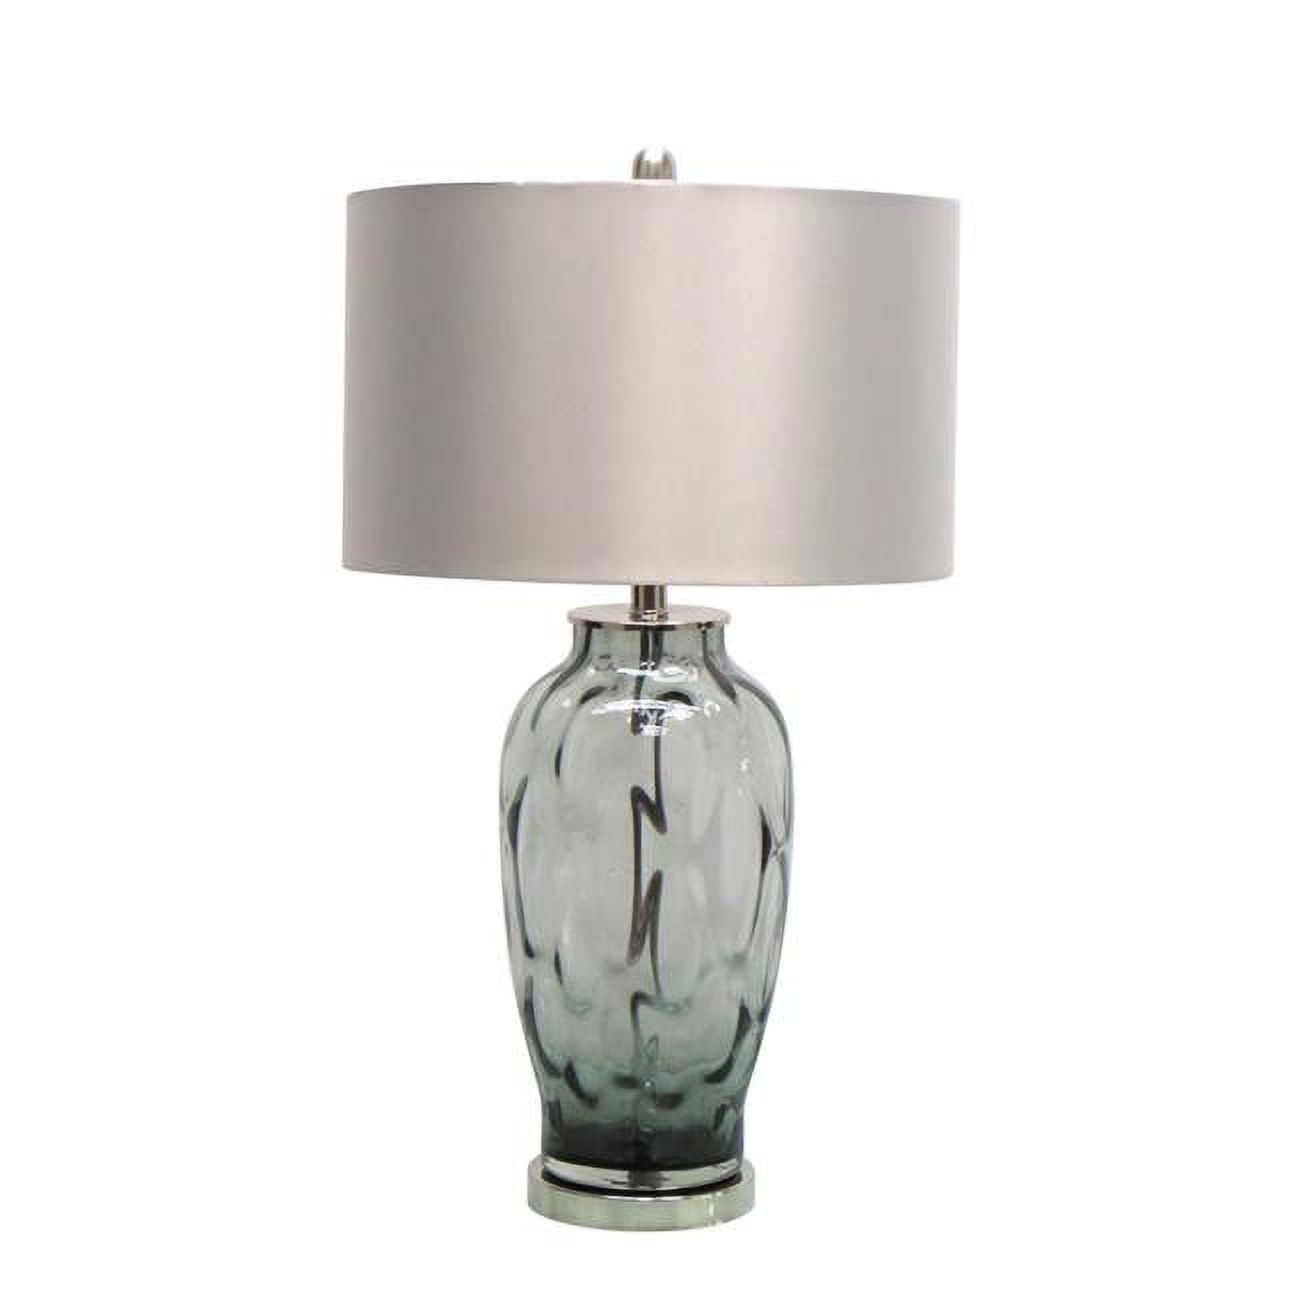 26.5 in. Table Lamp - image 1 of 1